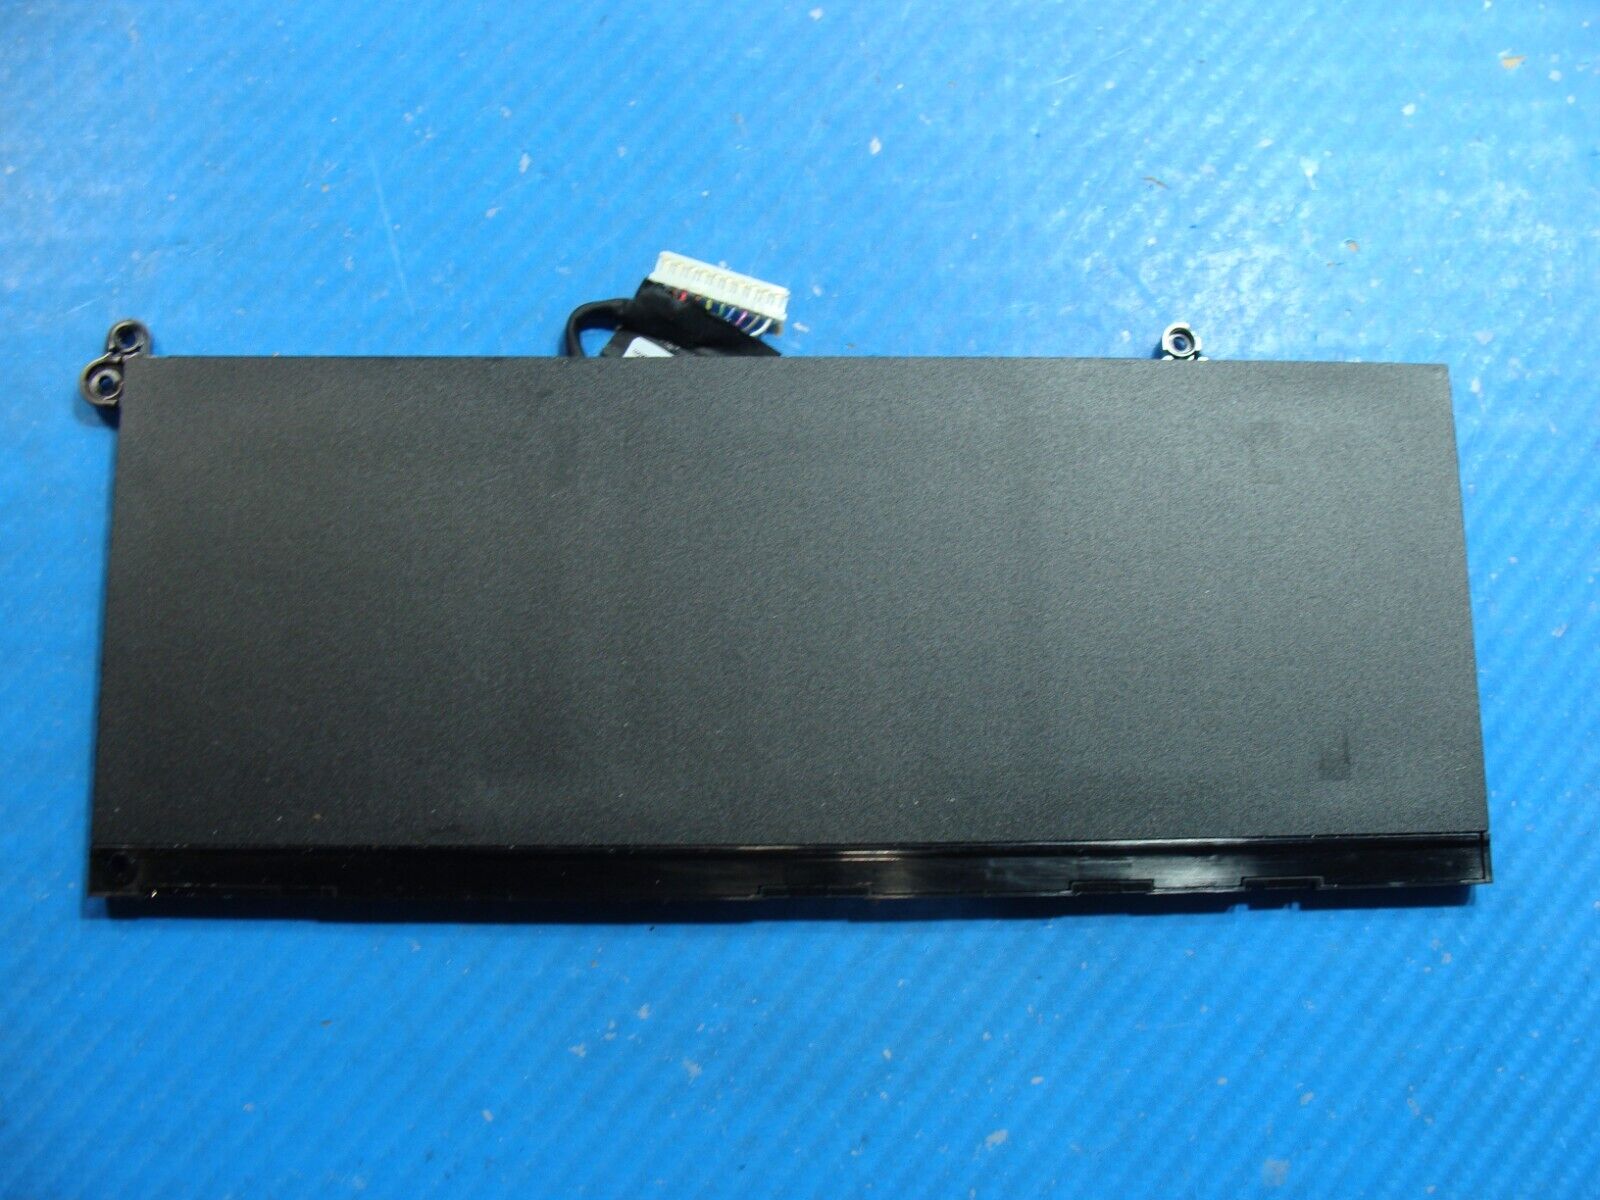 Dell Inspiron 15.6” 15 3511 11.25V 41Wh 3467mAh Battery 55NWG G91J0 Excellent